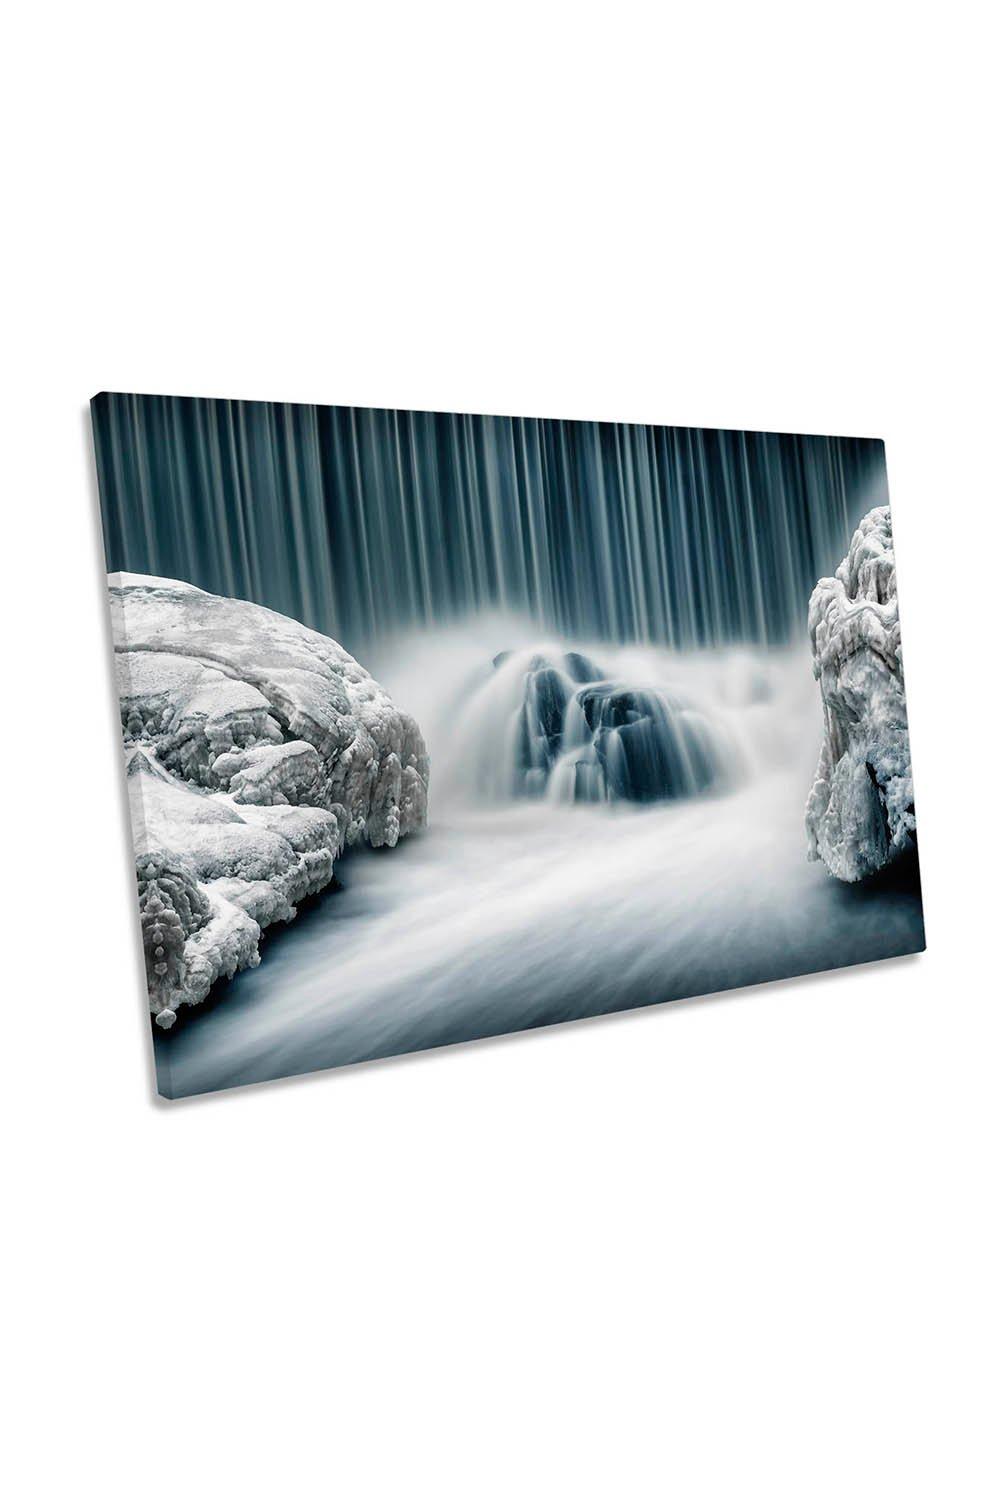 Icy Falls Waterfall Snow Winter Canvas Wall Art Picture Print